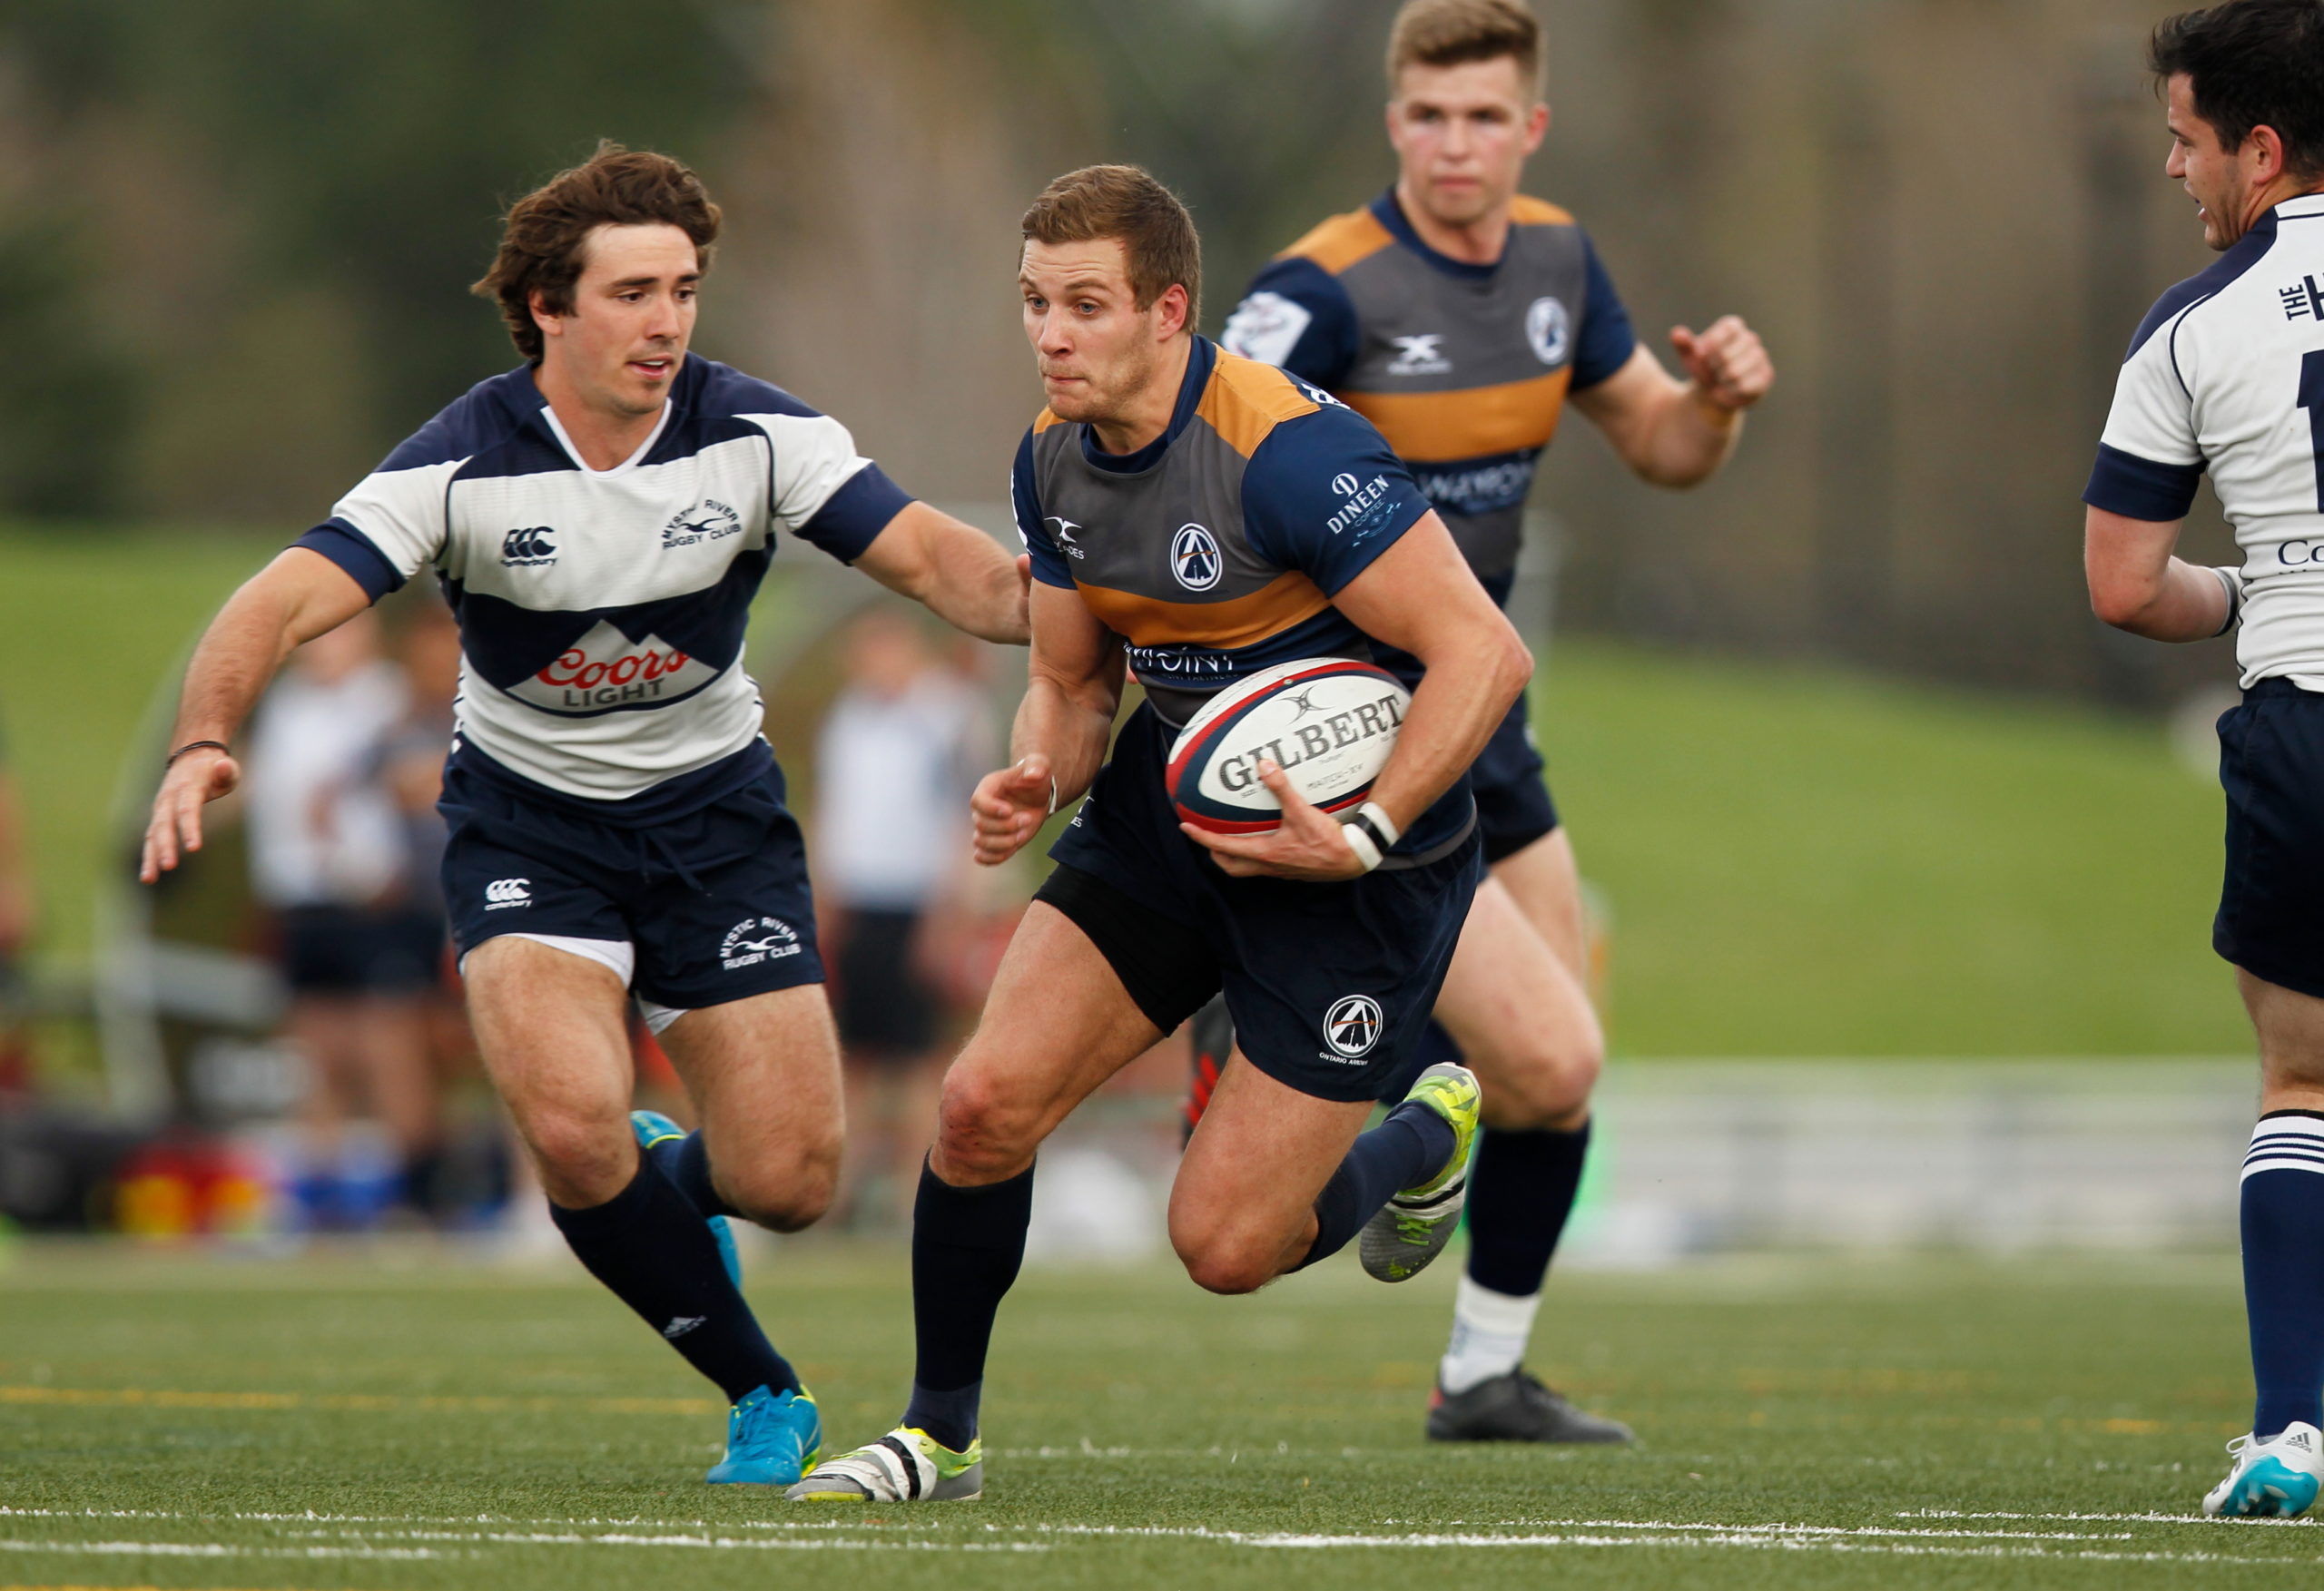 RELEASE: Ontario Arrows Planning Major League Rugby Entry for 2019